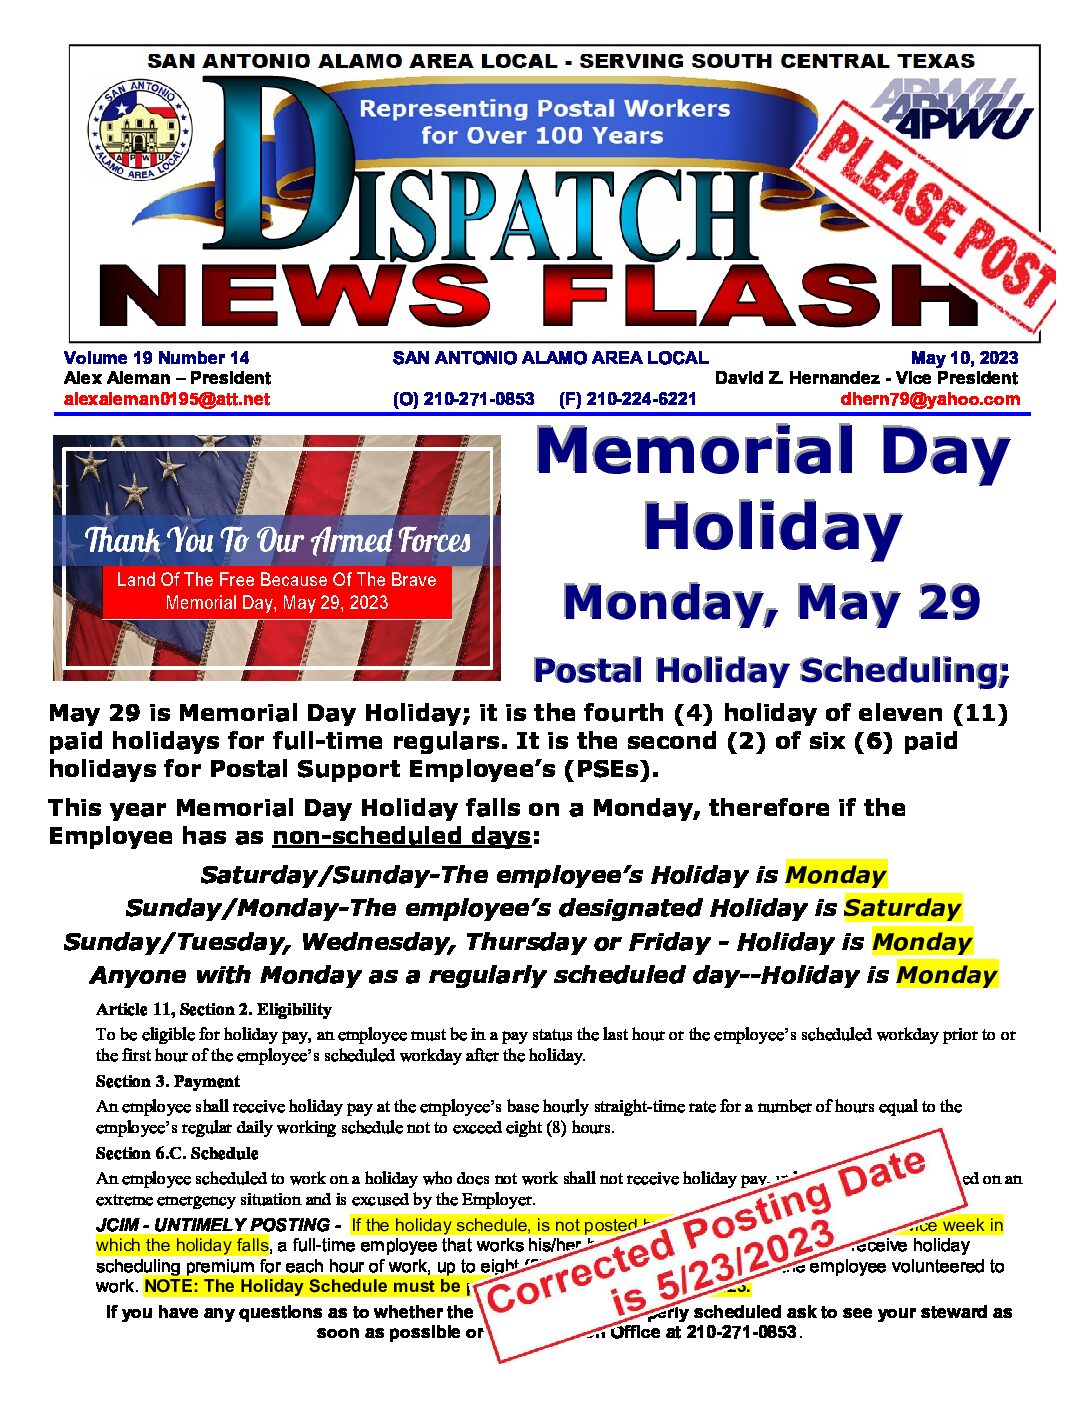 CORRECTED Memorial Day Holiday Scheduling - 